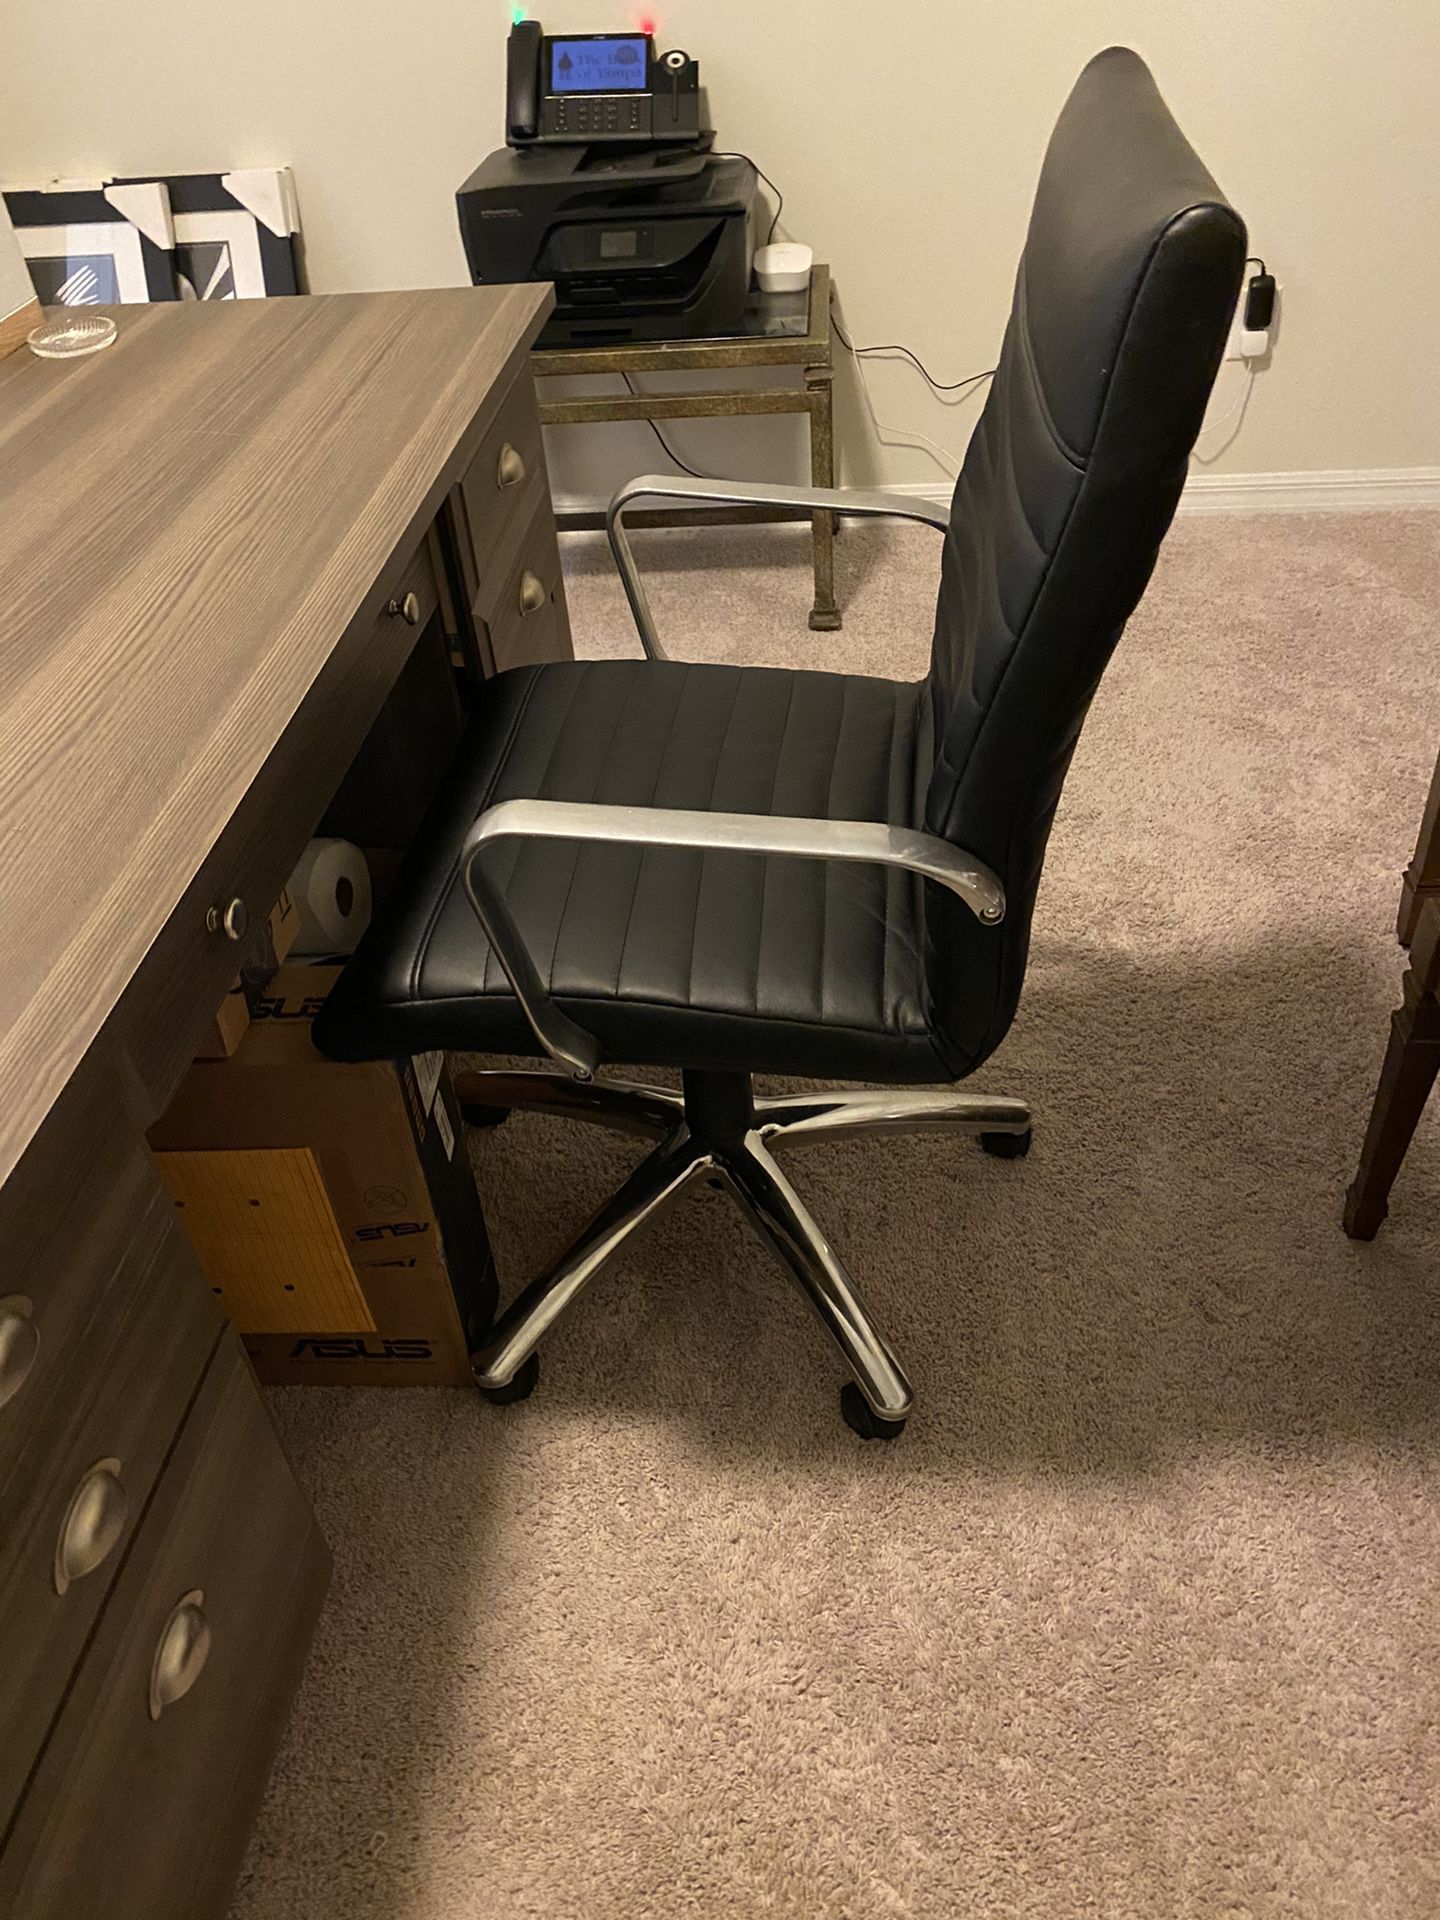 Brand new desk and chairs